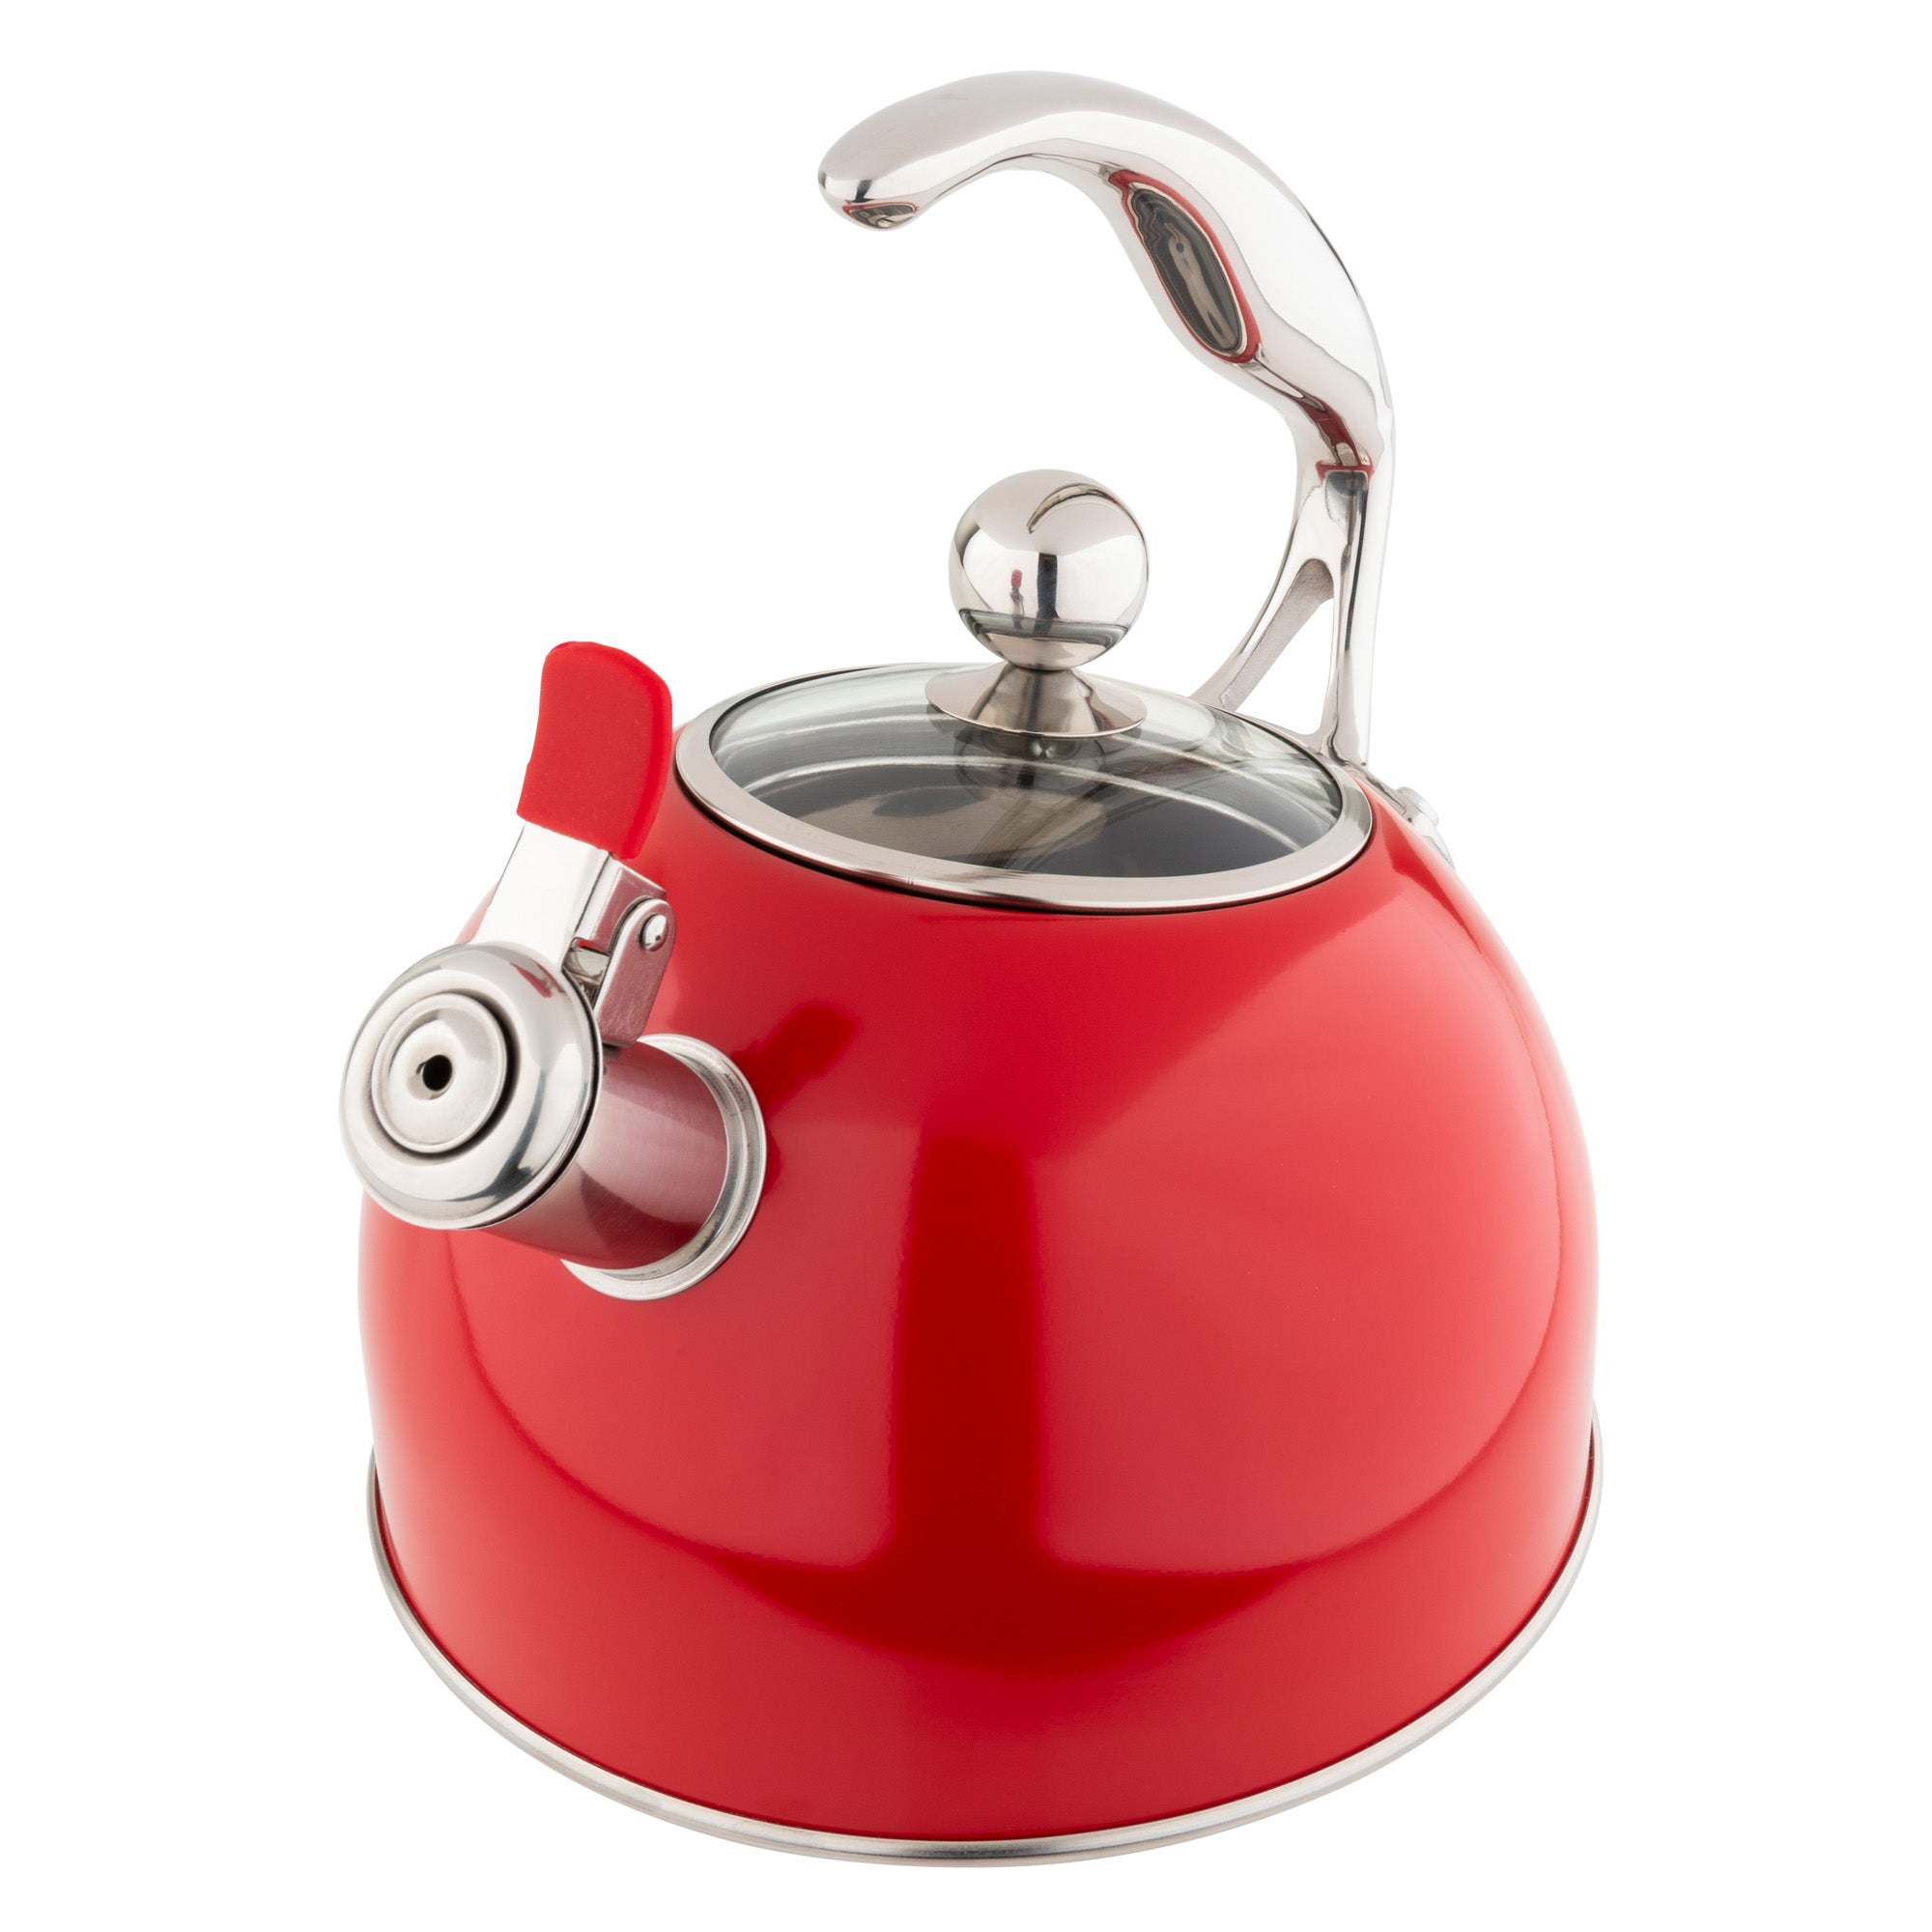 Viking 2.6-Quart Stainless Steel Kettle with 3-Ply Base & Reviews